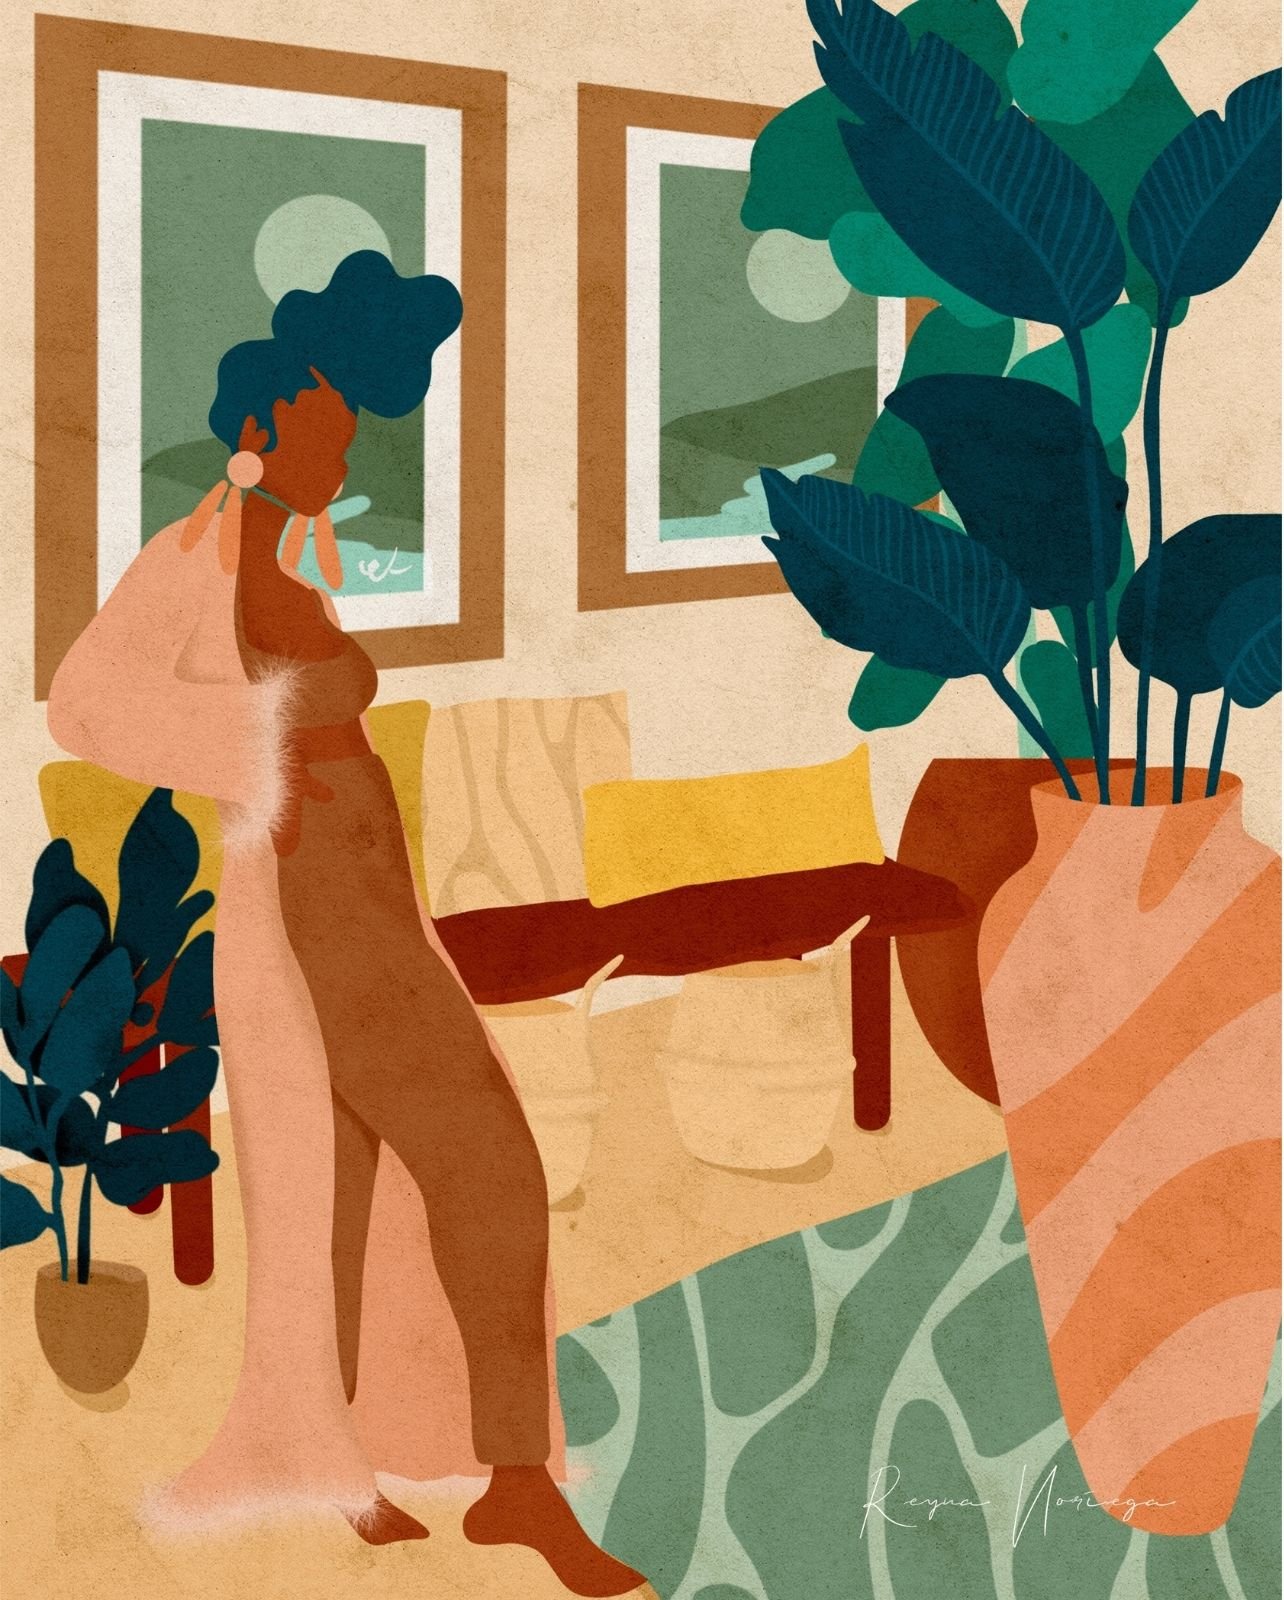 Illustration by Reyna Noriega, woman is wearing lounge clothes in a colorfully decorated room